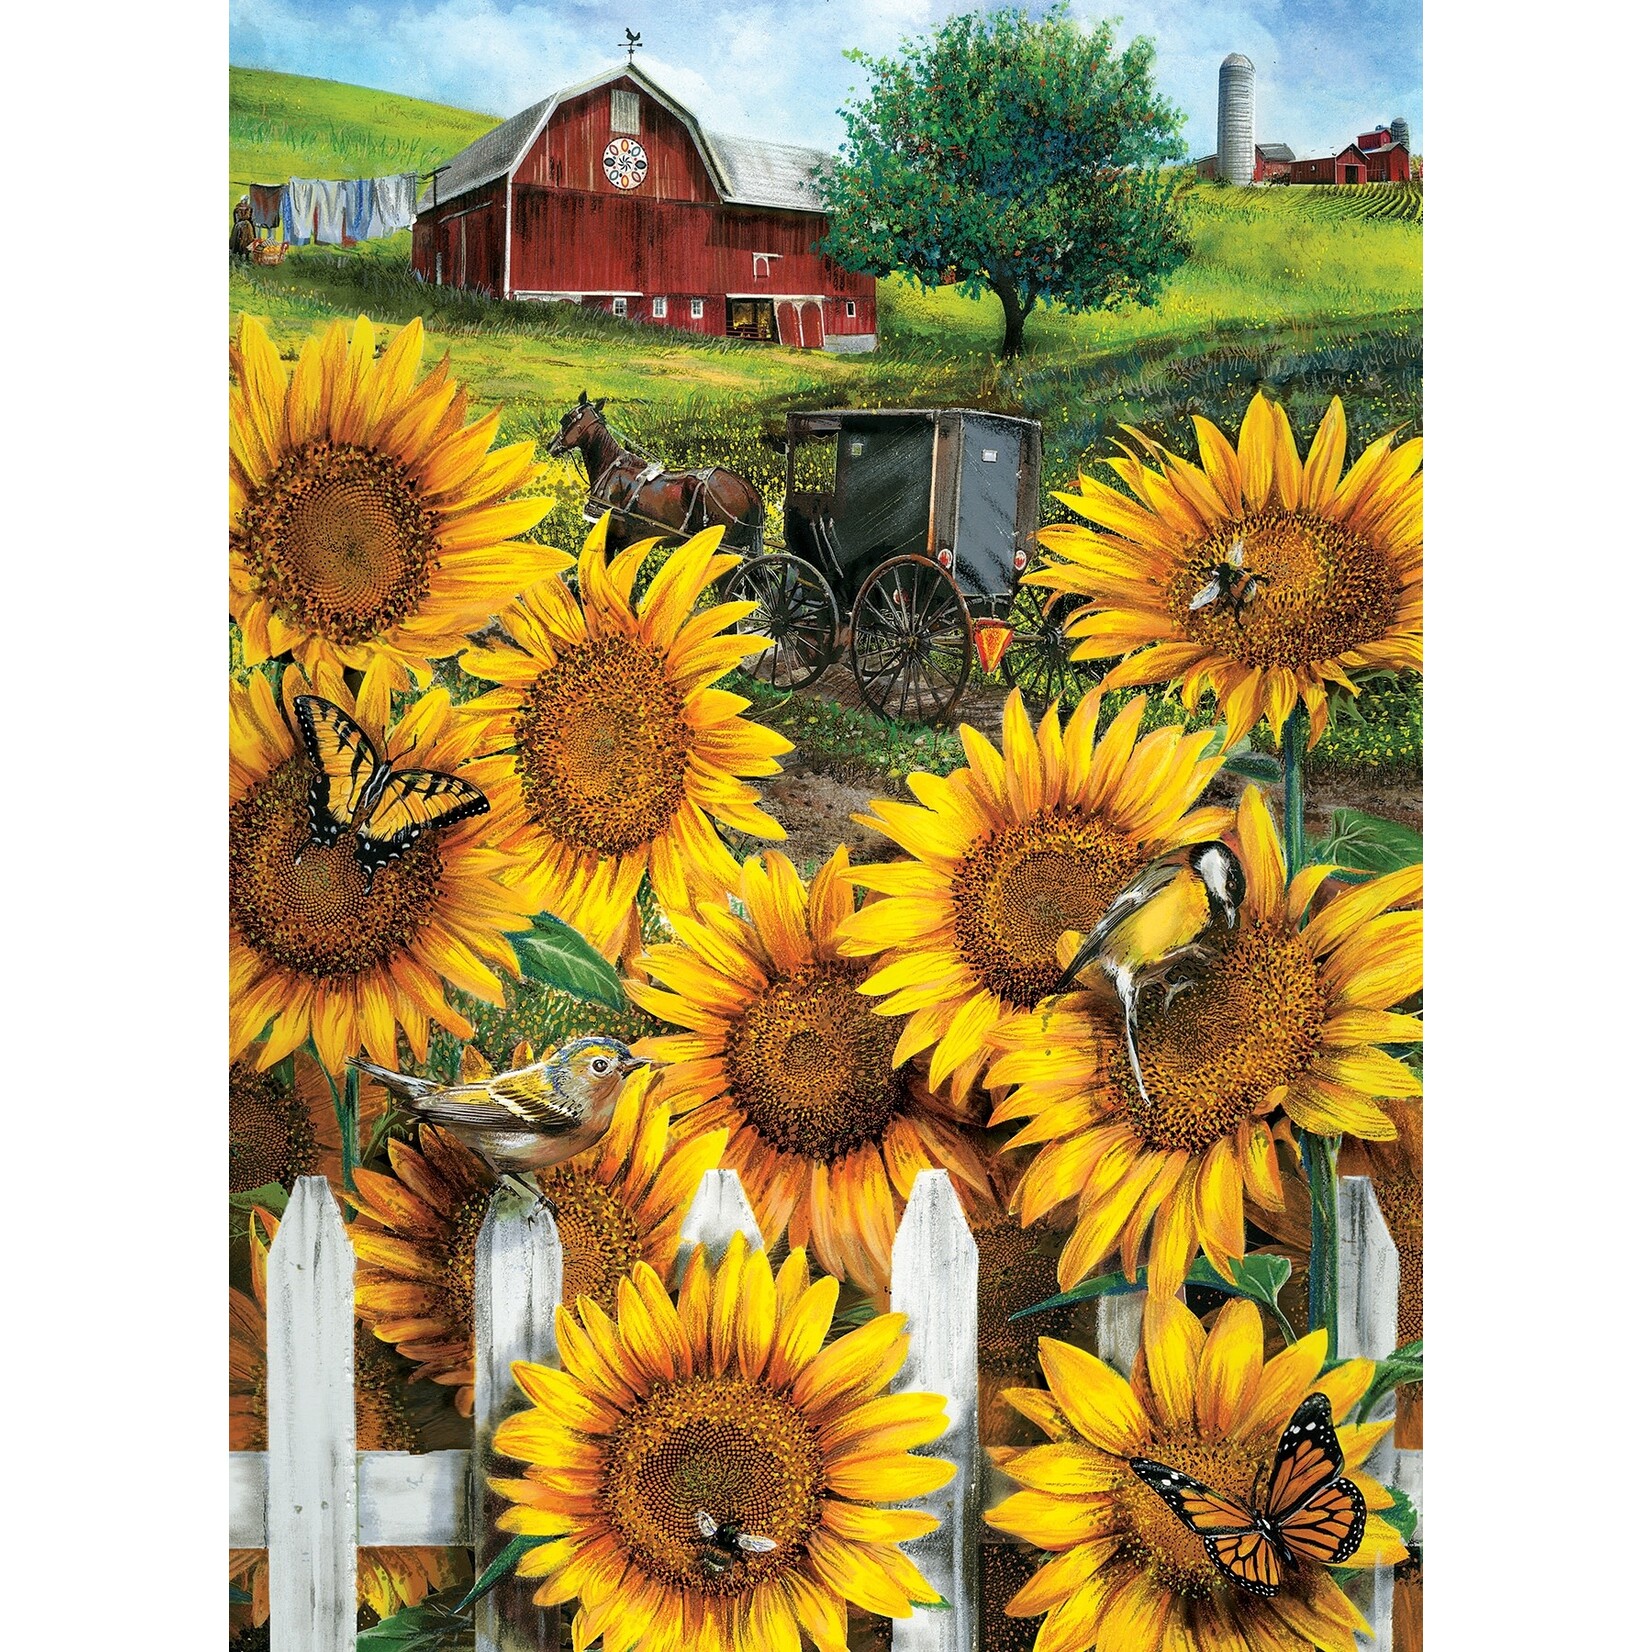 Cobble Hill Country Paradise 500pc Puzzle